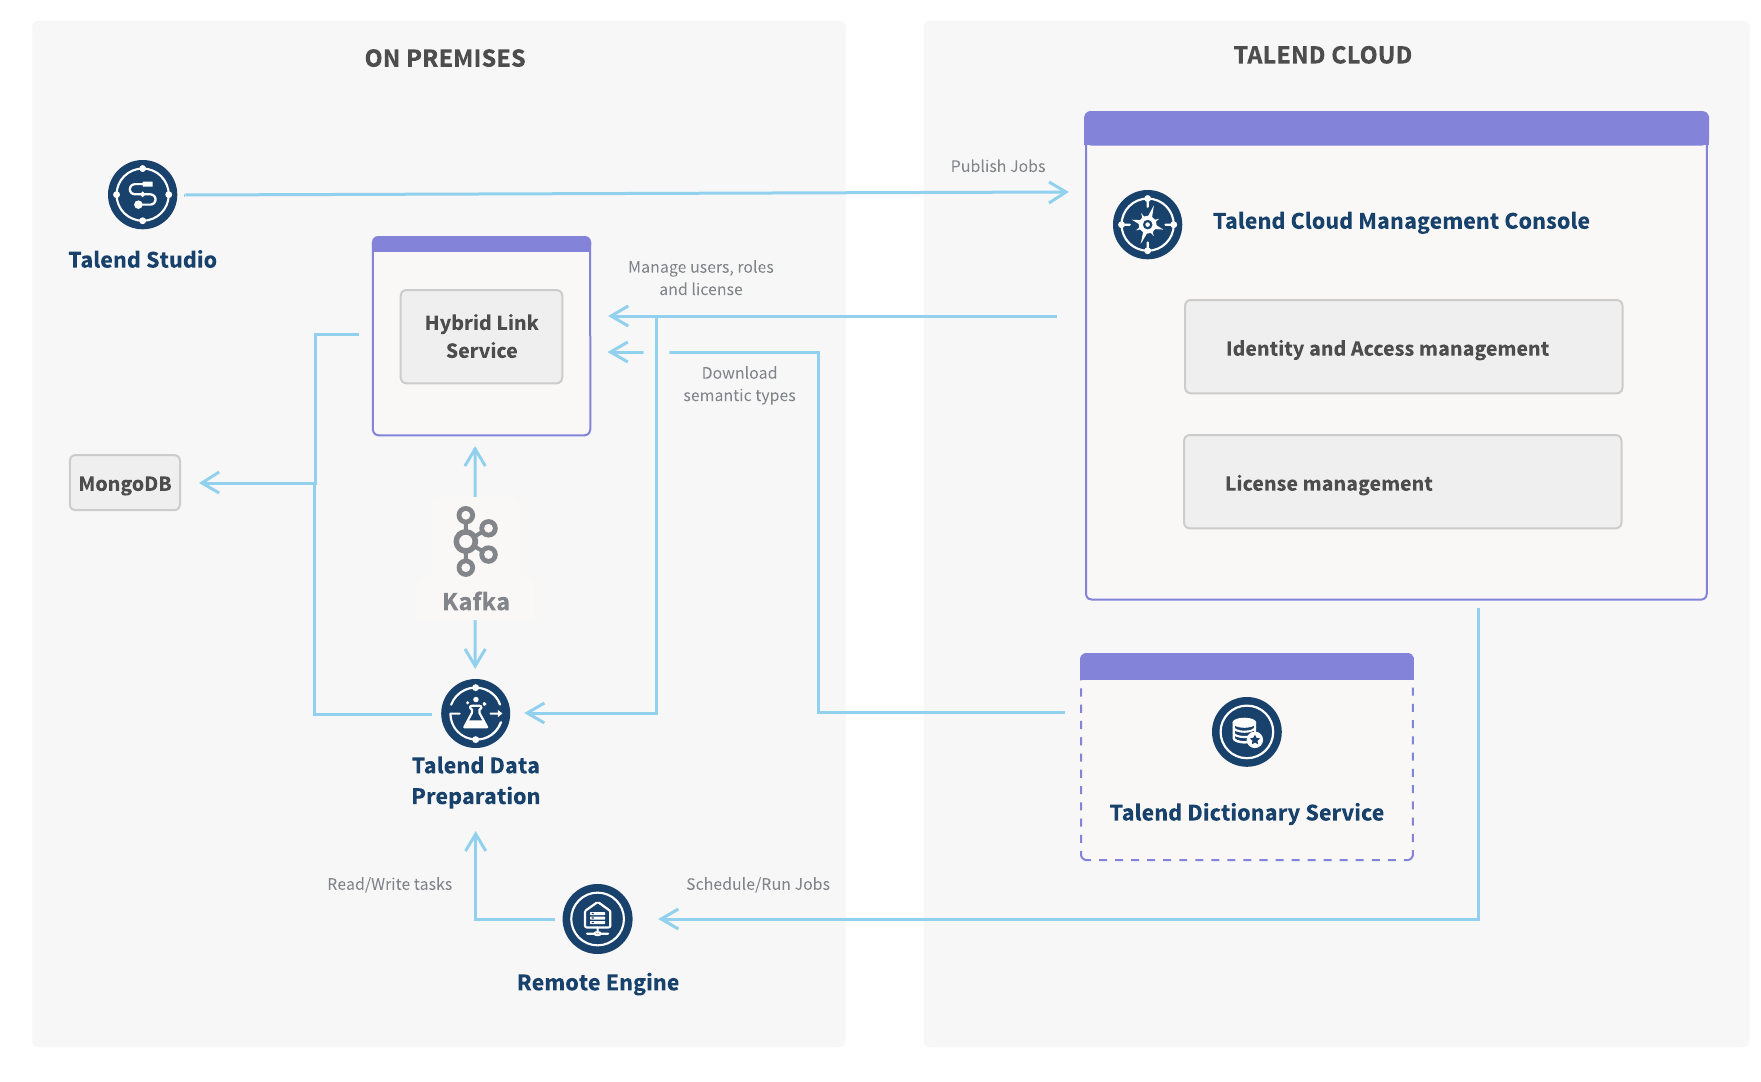 The diagram has two sections: on premises and Talend Cloud. In the on premises section, Talend Remote Engine receives Job run scheduling instructions from Talend Management Console, and reads and writes tasks to Talend Data Preparation. Talend Data Preparation communicates with Talend Dictionary Service through the Hybrid Link Service and Kafka. Talend Dictionary Service synchronizes semantic types and data quality rules through the Hybrid Link Service. In the Talend Cloud section, Talend Data Preparation users, roles, and license are managed from Talend Management Console.